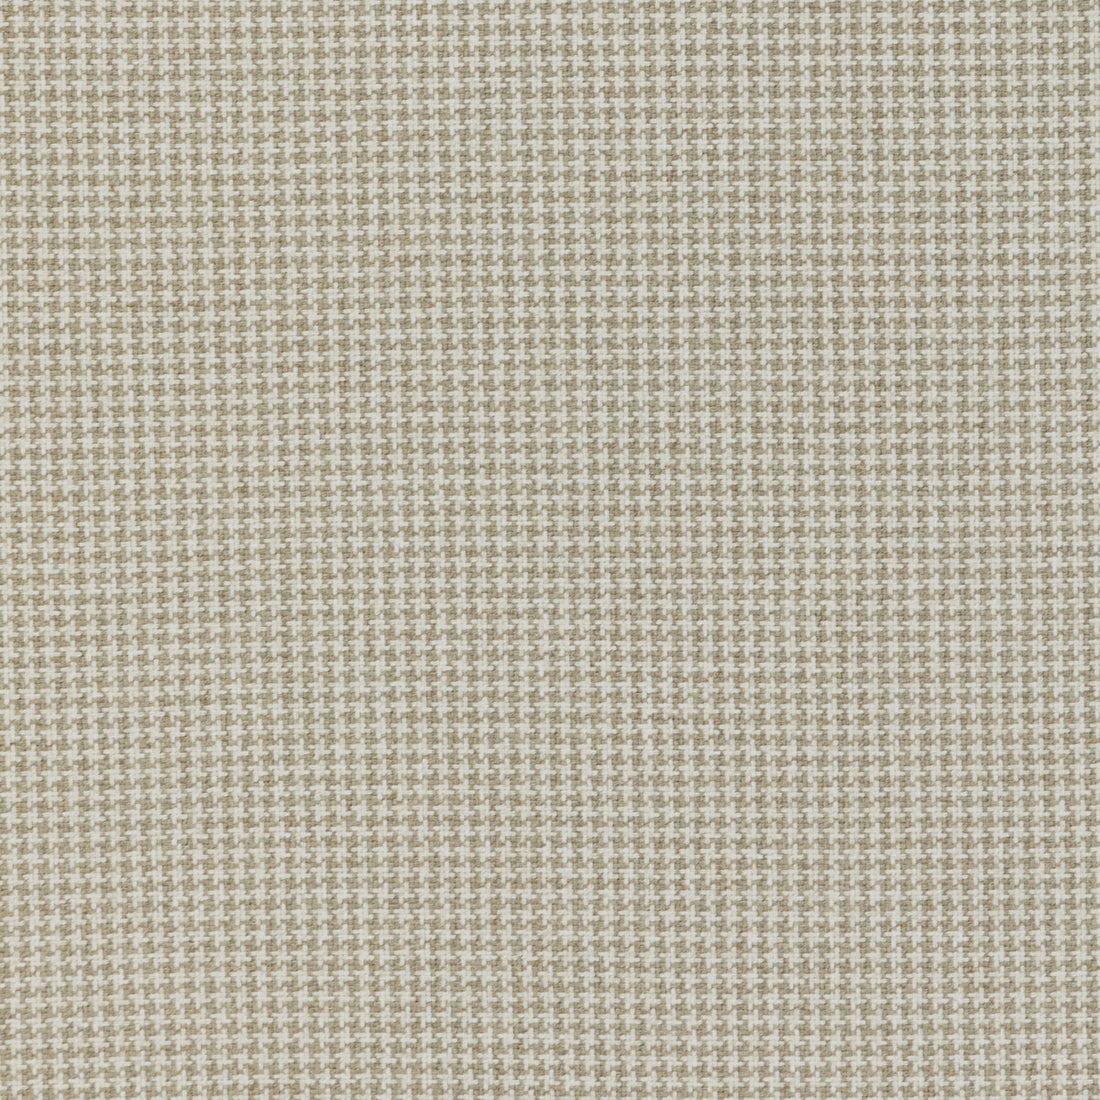 Steamboat fabric in linen color - pattern 36258.106.0 - by Kravet Contract in the Supreen collection